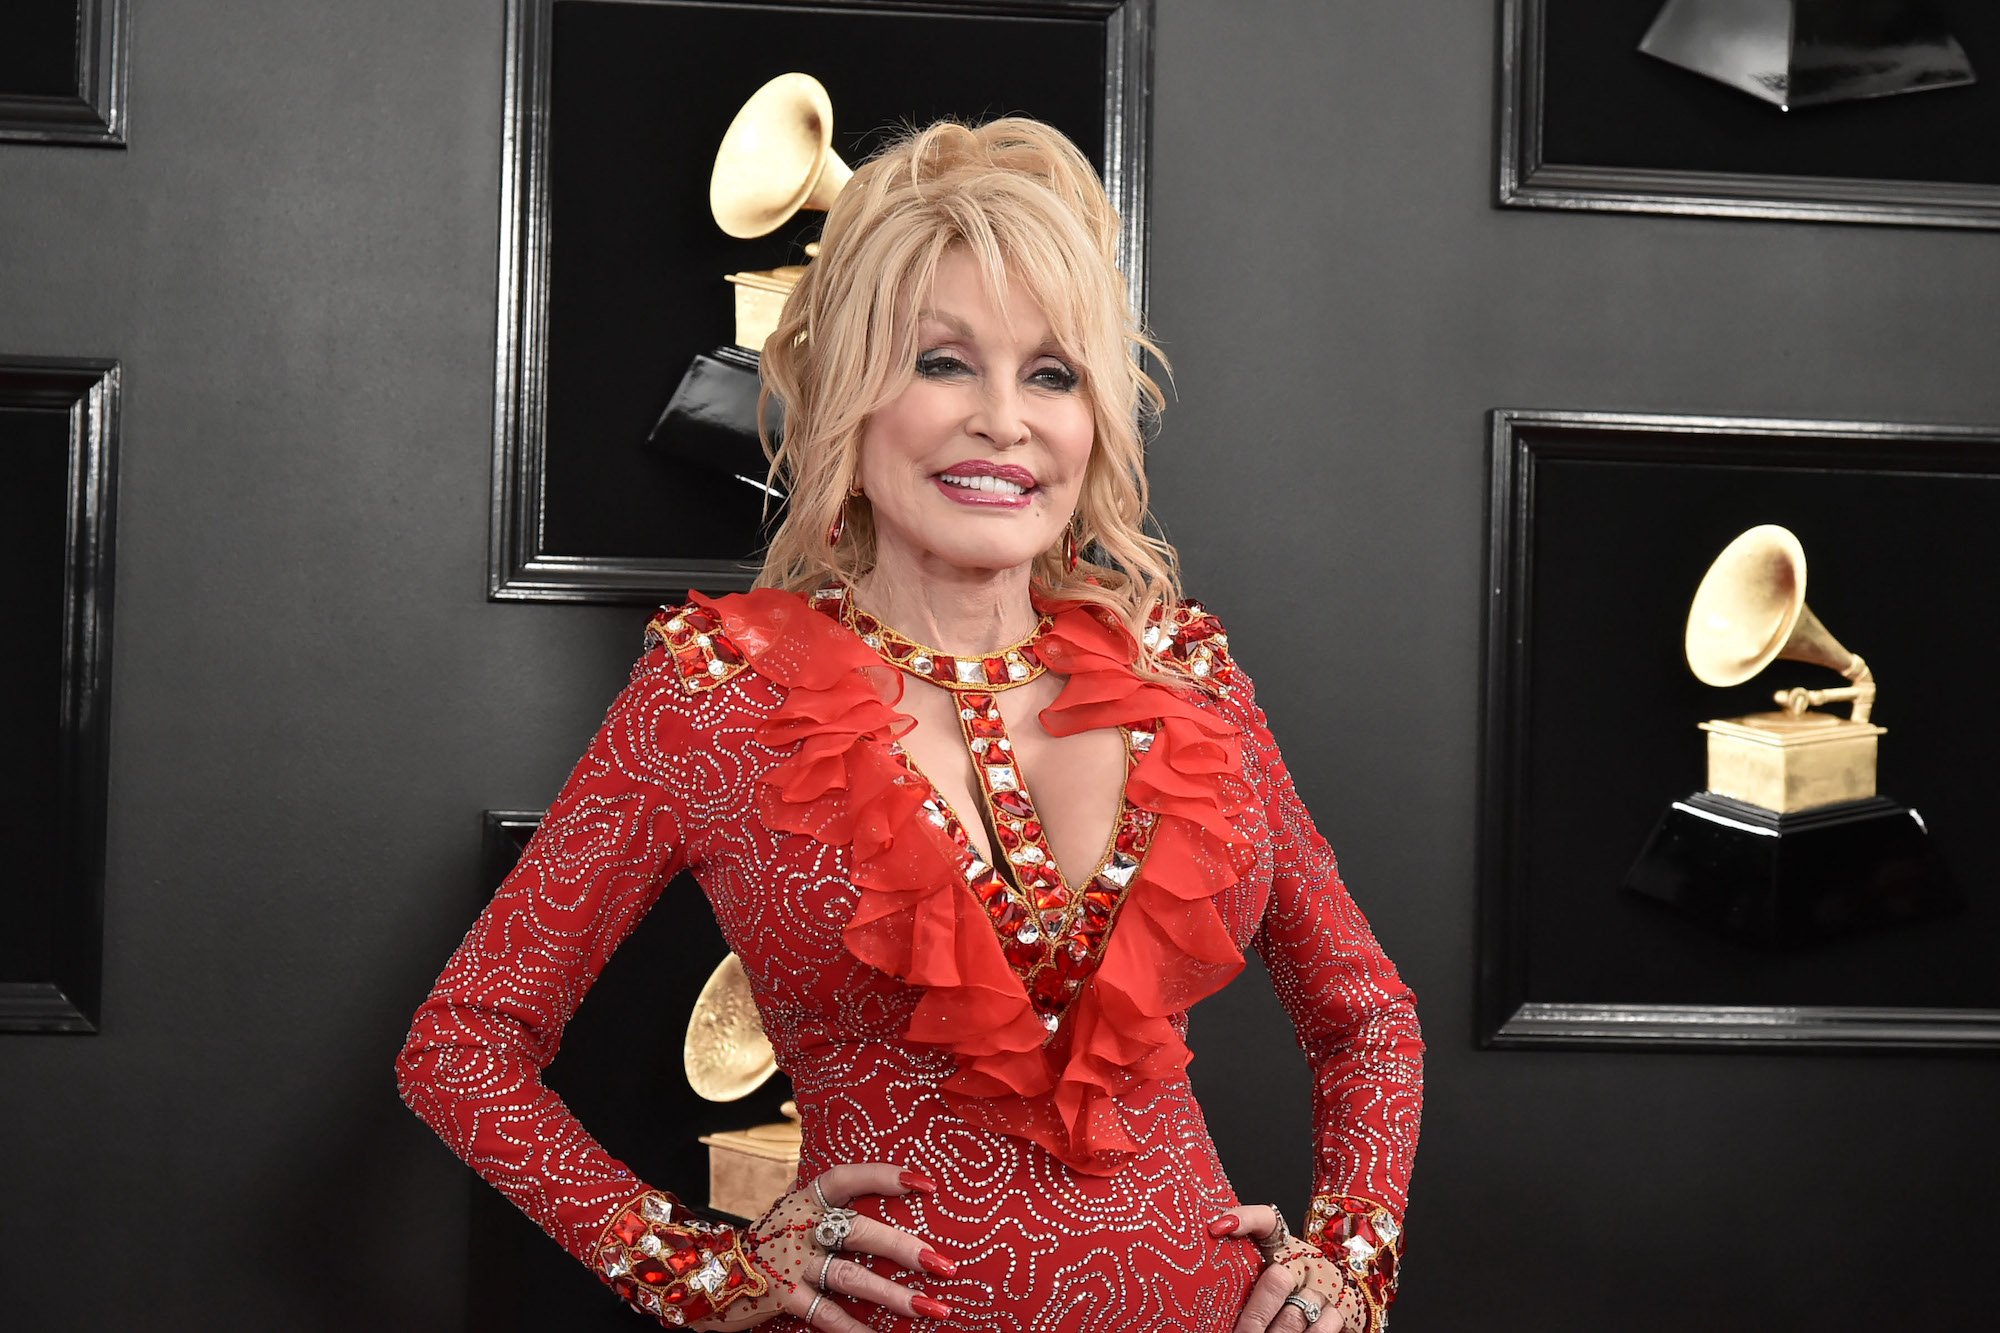 Dolly Parton's Dream Job if She Wasn't a Singer Involves Doing Other